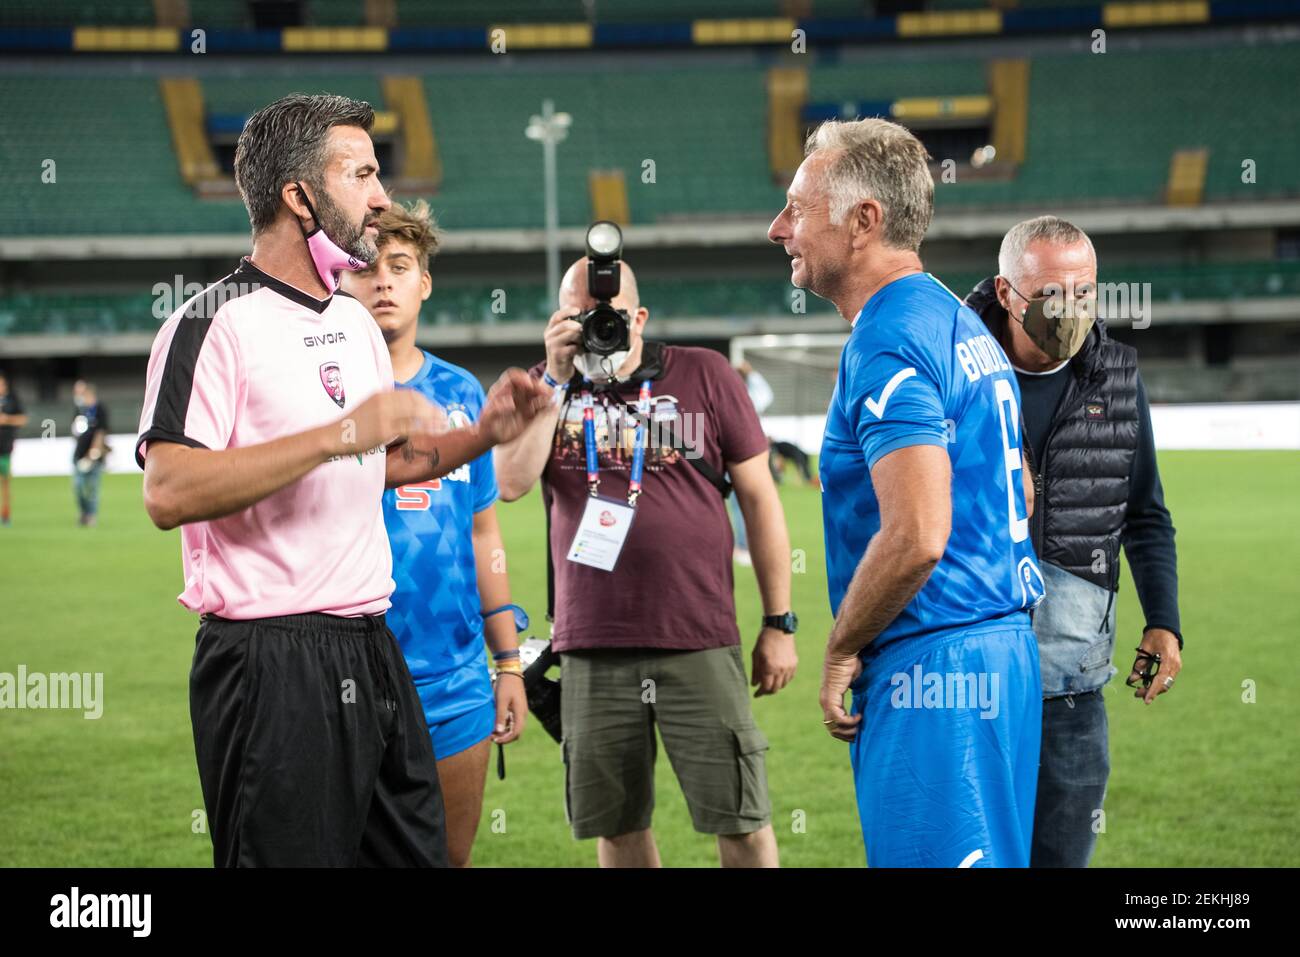 Christian Panucci, Davide Bonolis, Giorgio Panariello and Paolo Bonolis at  the Match of the Heart live from the Bentegodi Stadium in Verona with the  challenges of the teams led by Alessandra Amoroso,